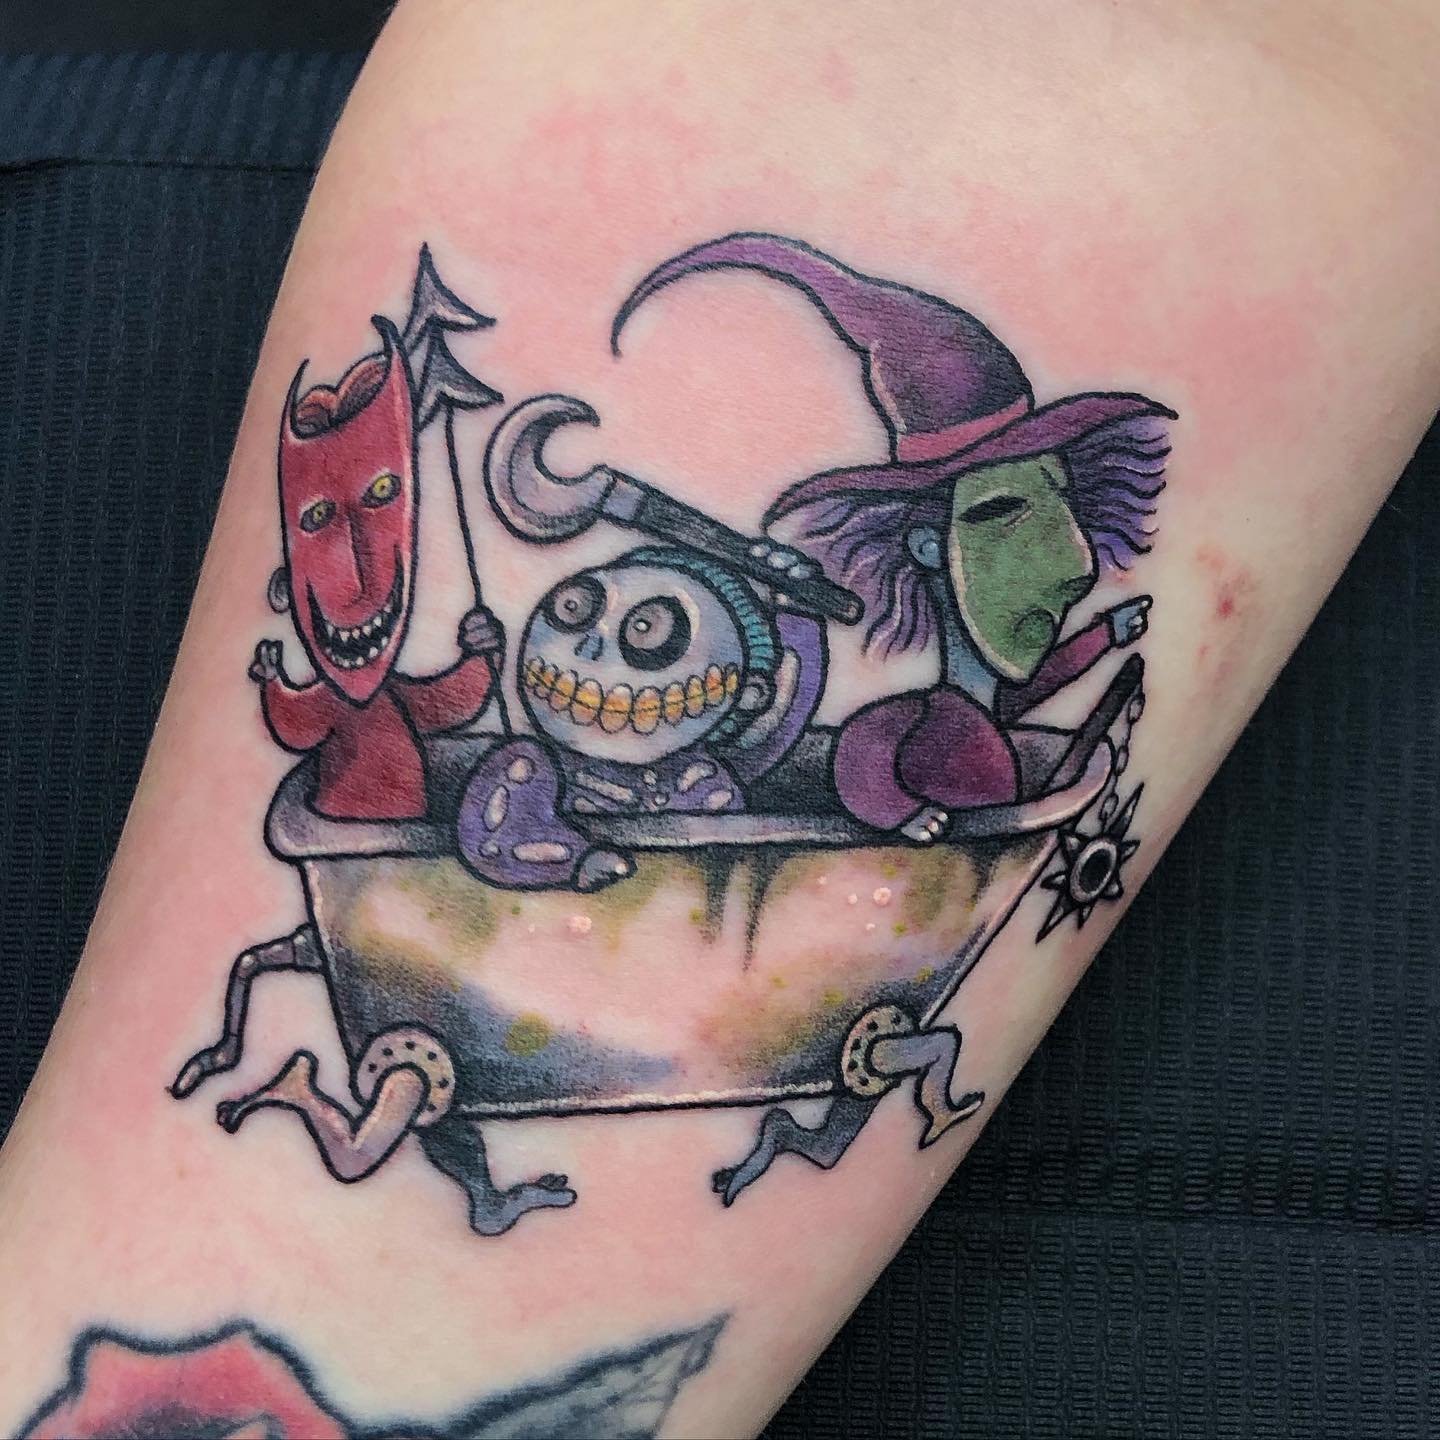 Handsome Tattoo  Nightmare Before Christmas Oogie Boogie Lock Shock  Barrel and Zero arm tattoo in black and grey  Time for some ink  whatcha want I can create a custom one